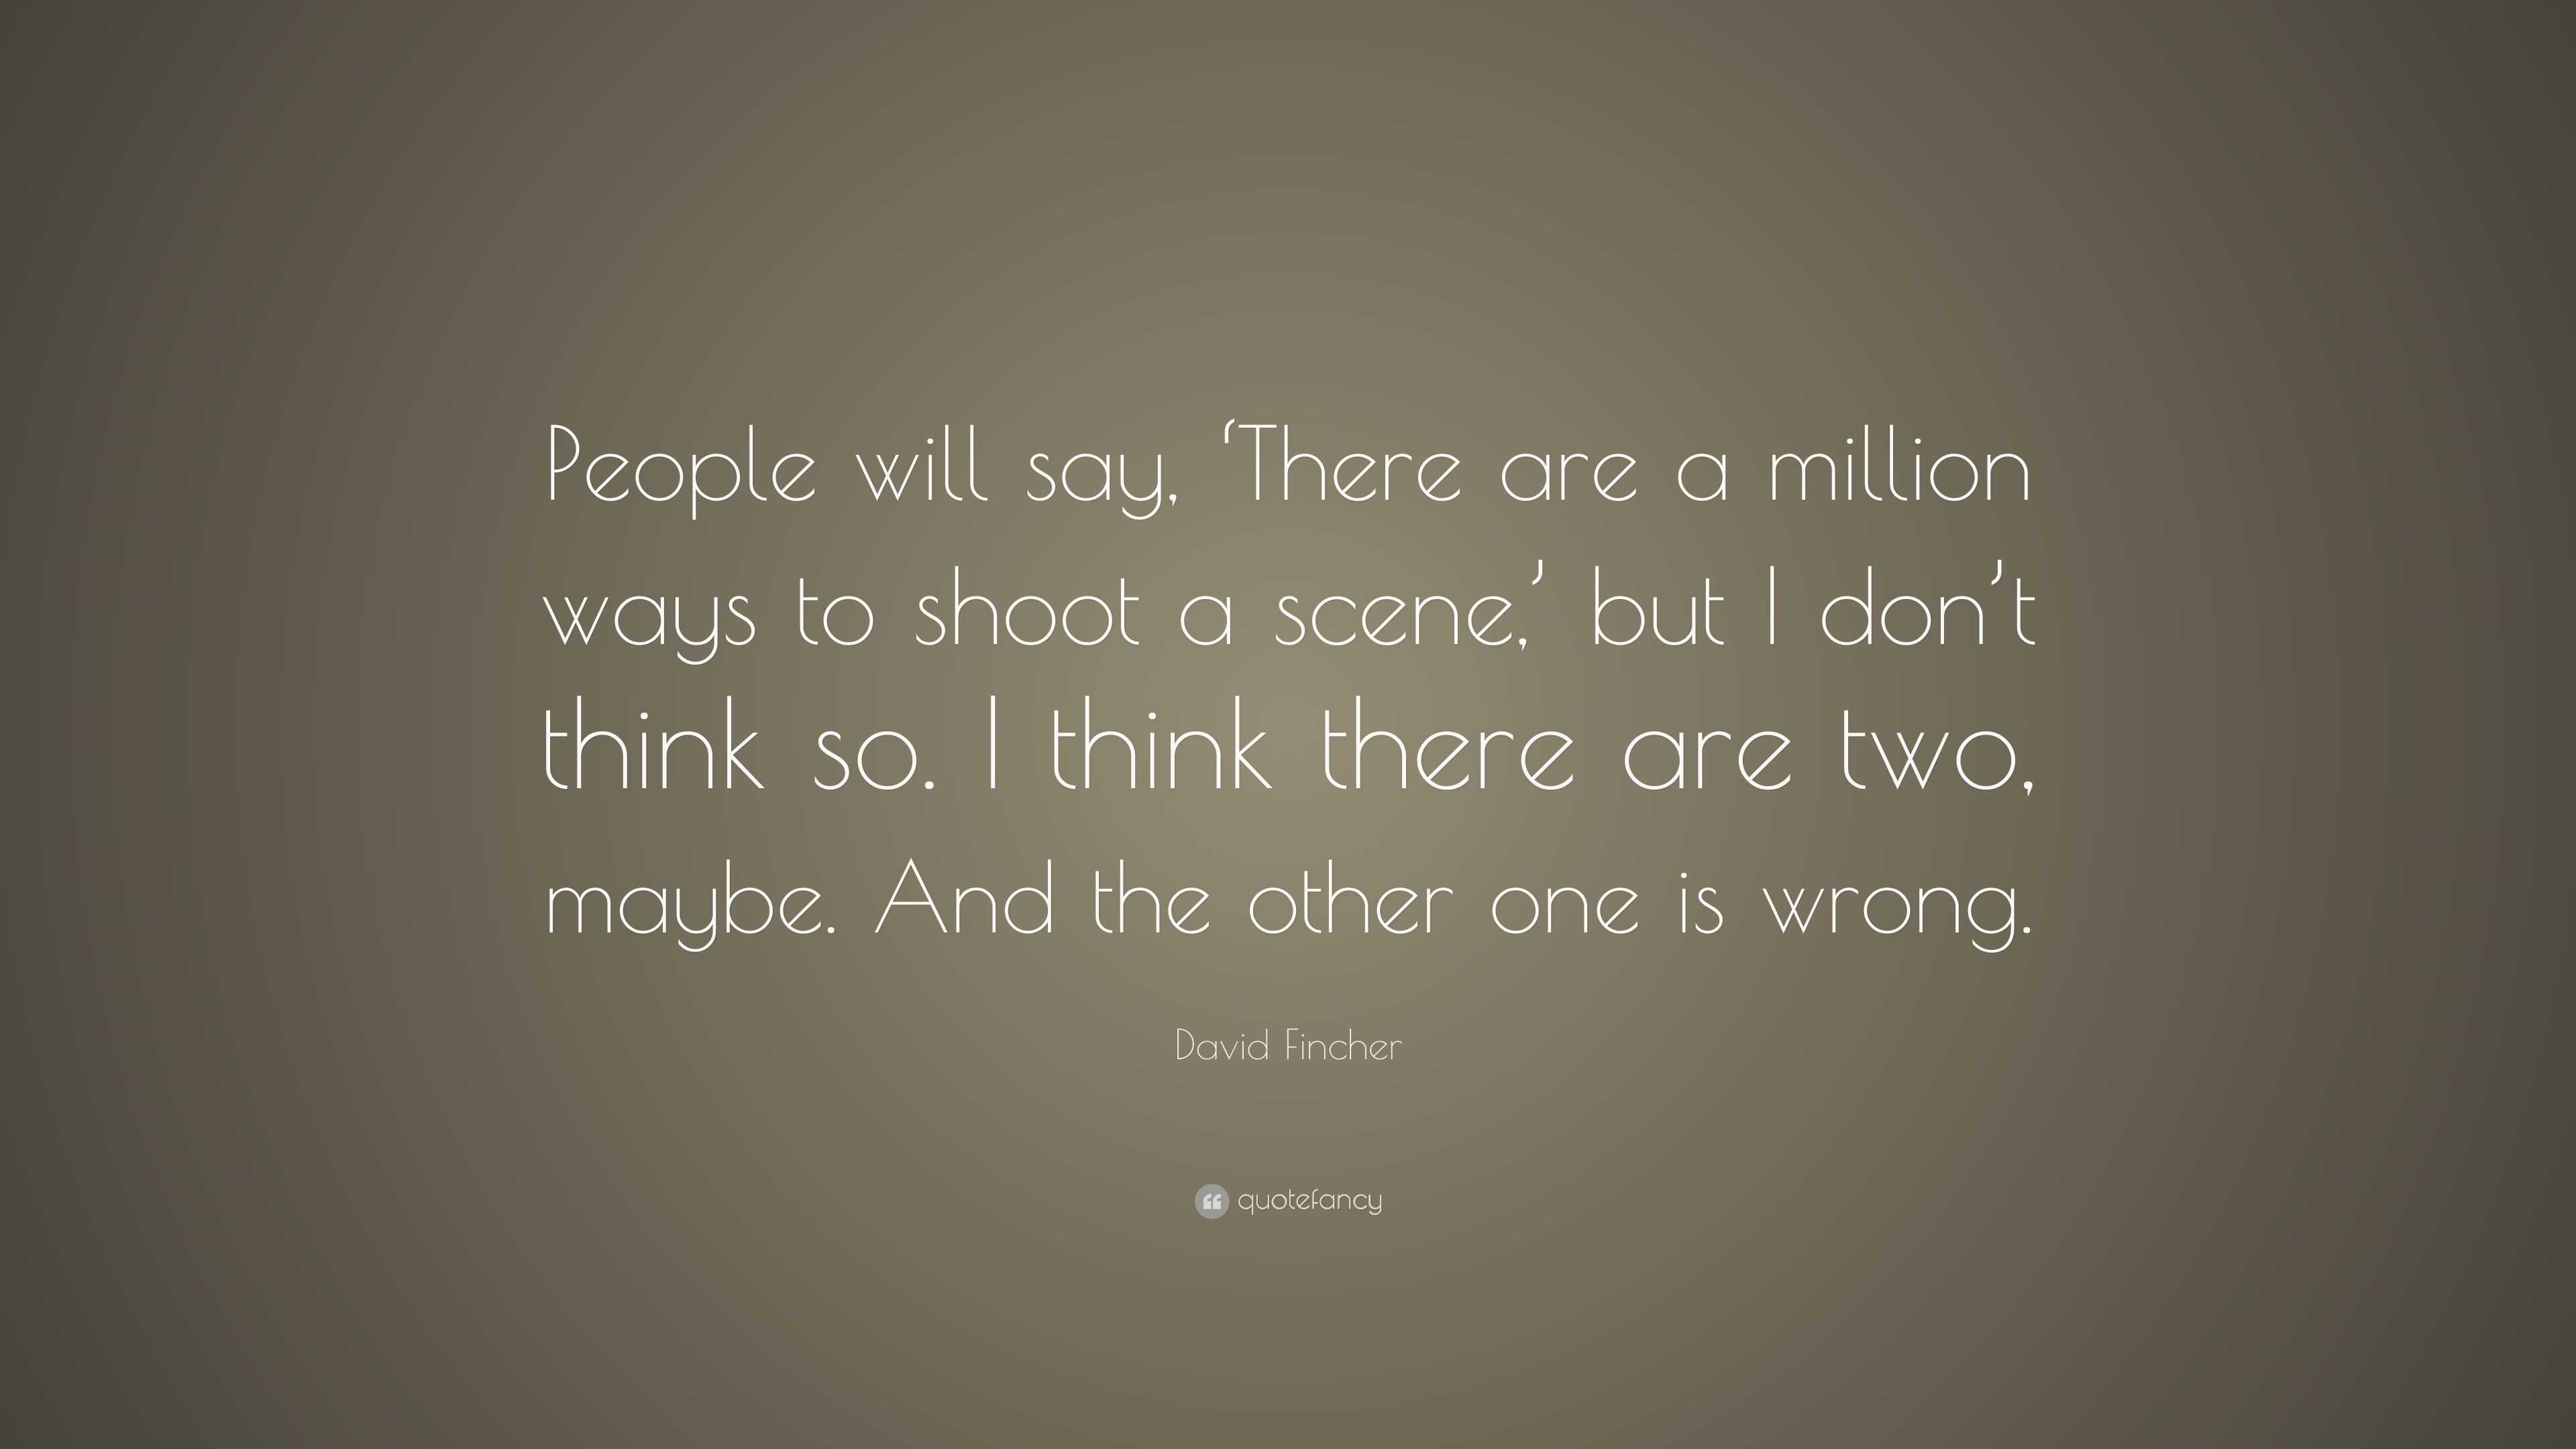 David Fincher Quote: “People will say, ‘There are a million ways to ...